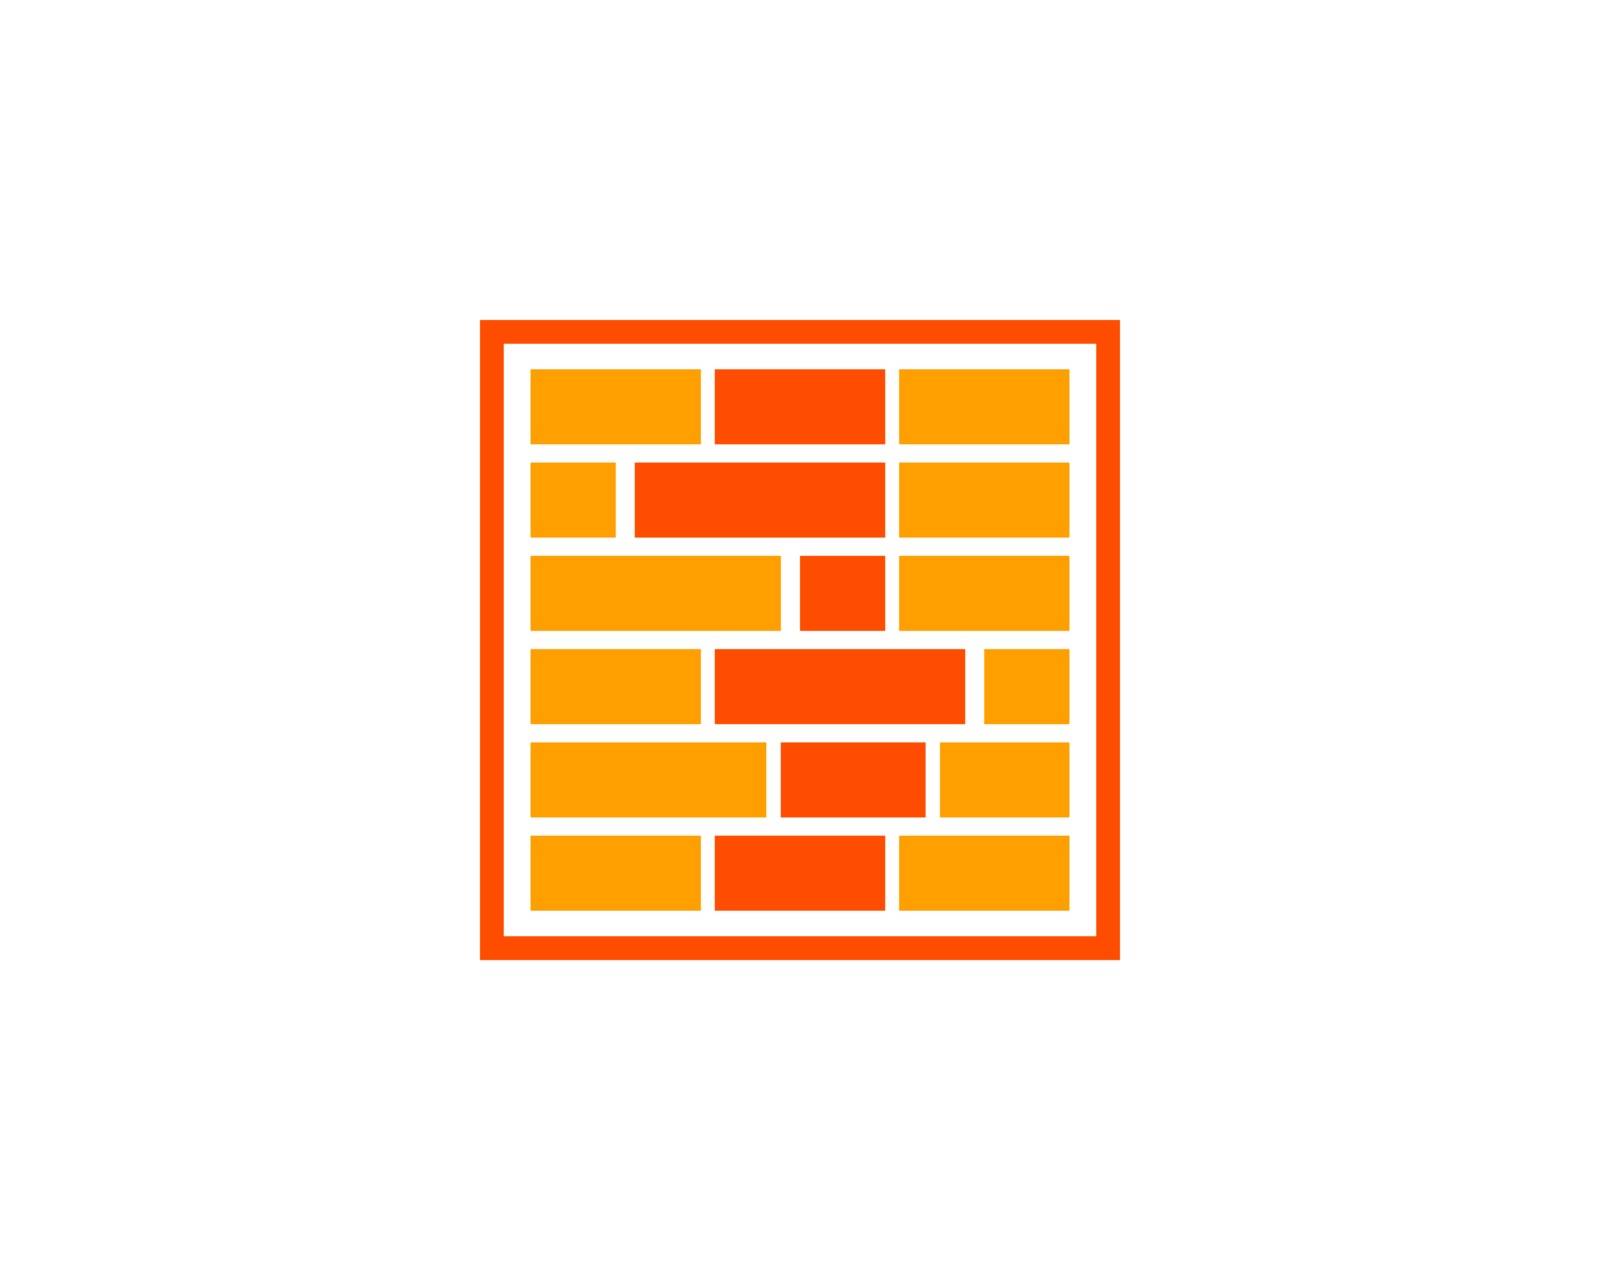 is a symbol associated with architects, bricks, construction or housing